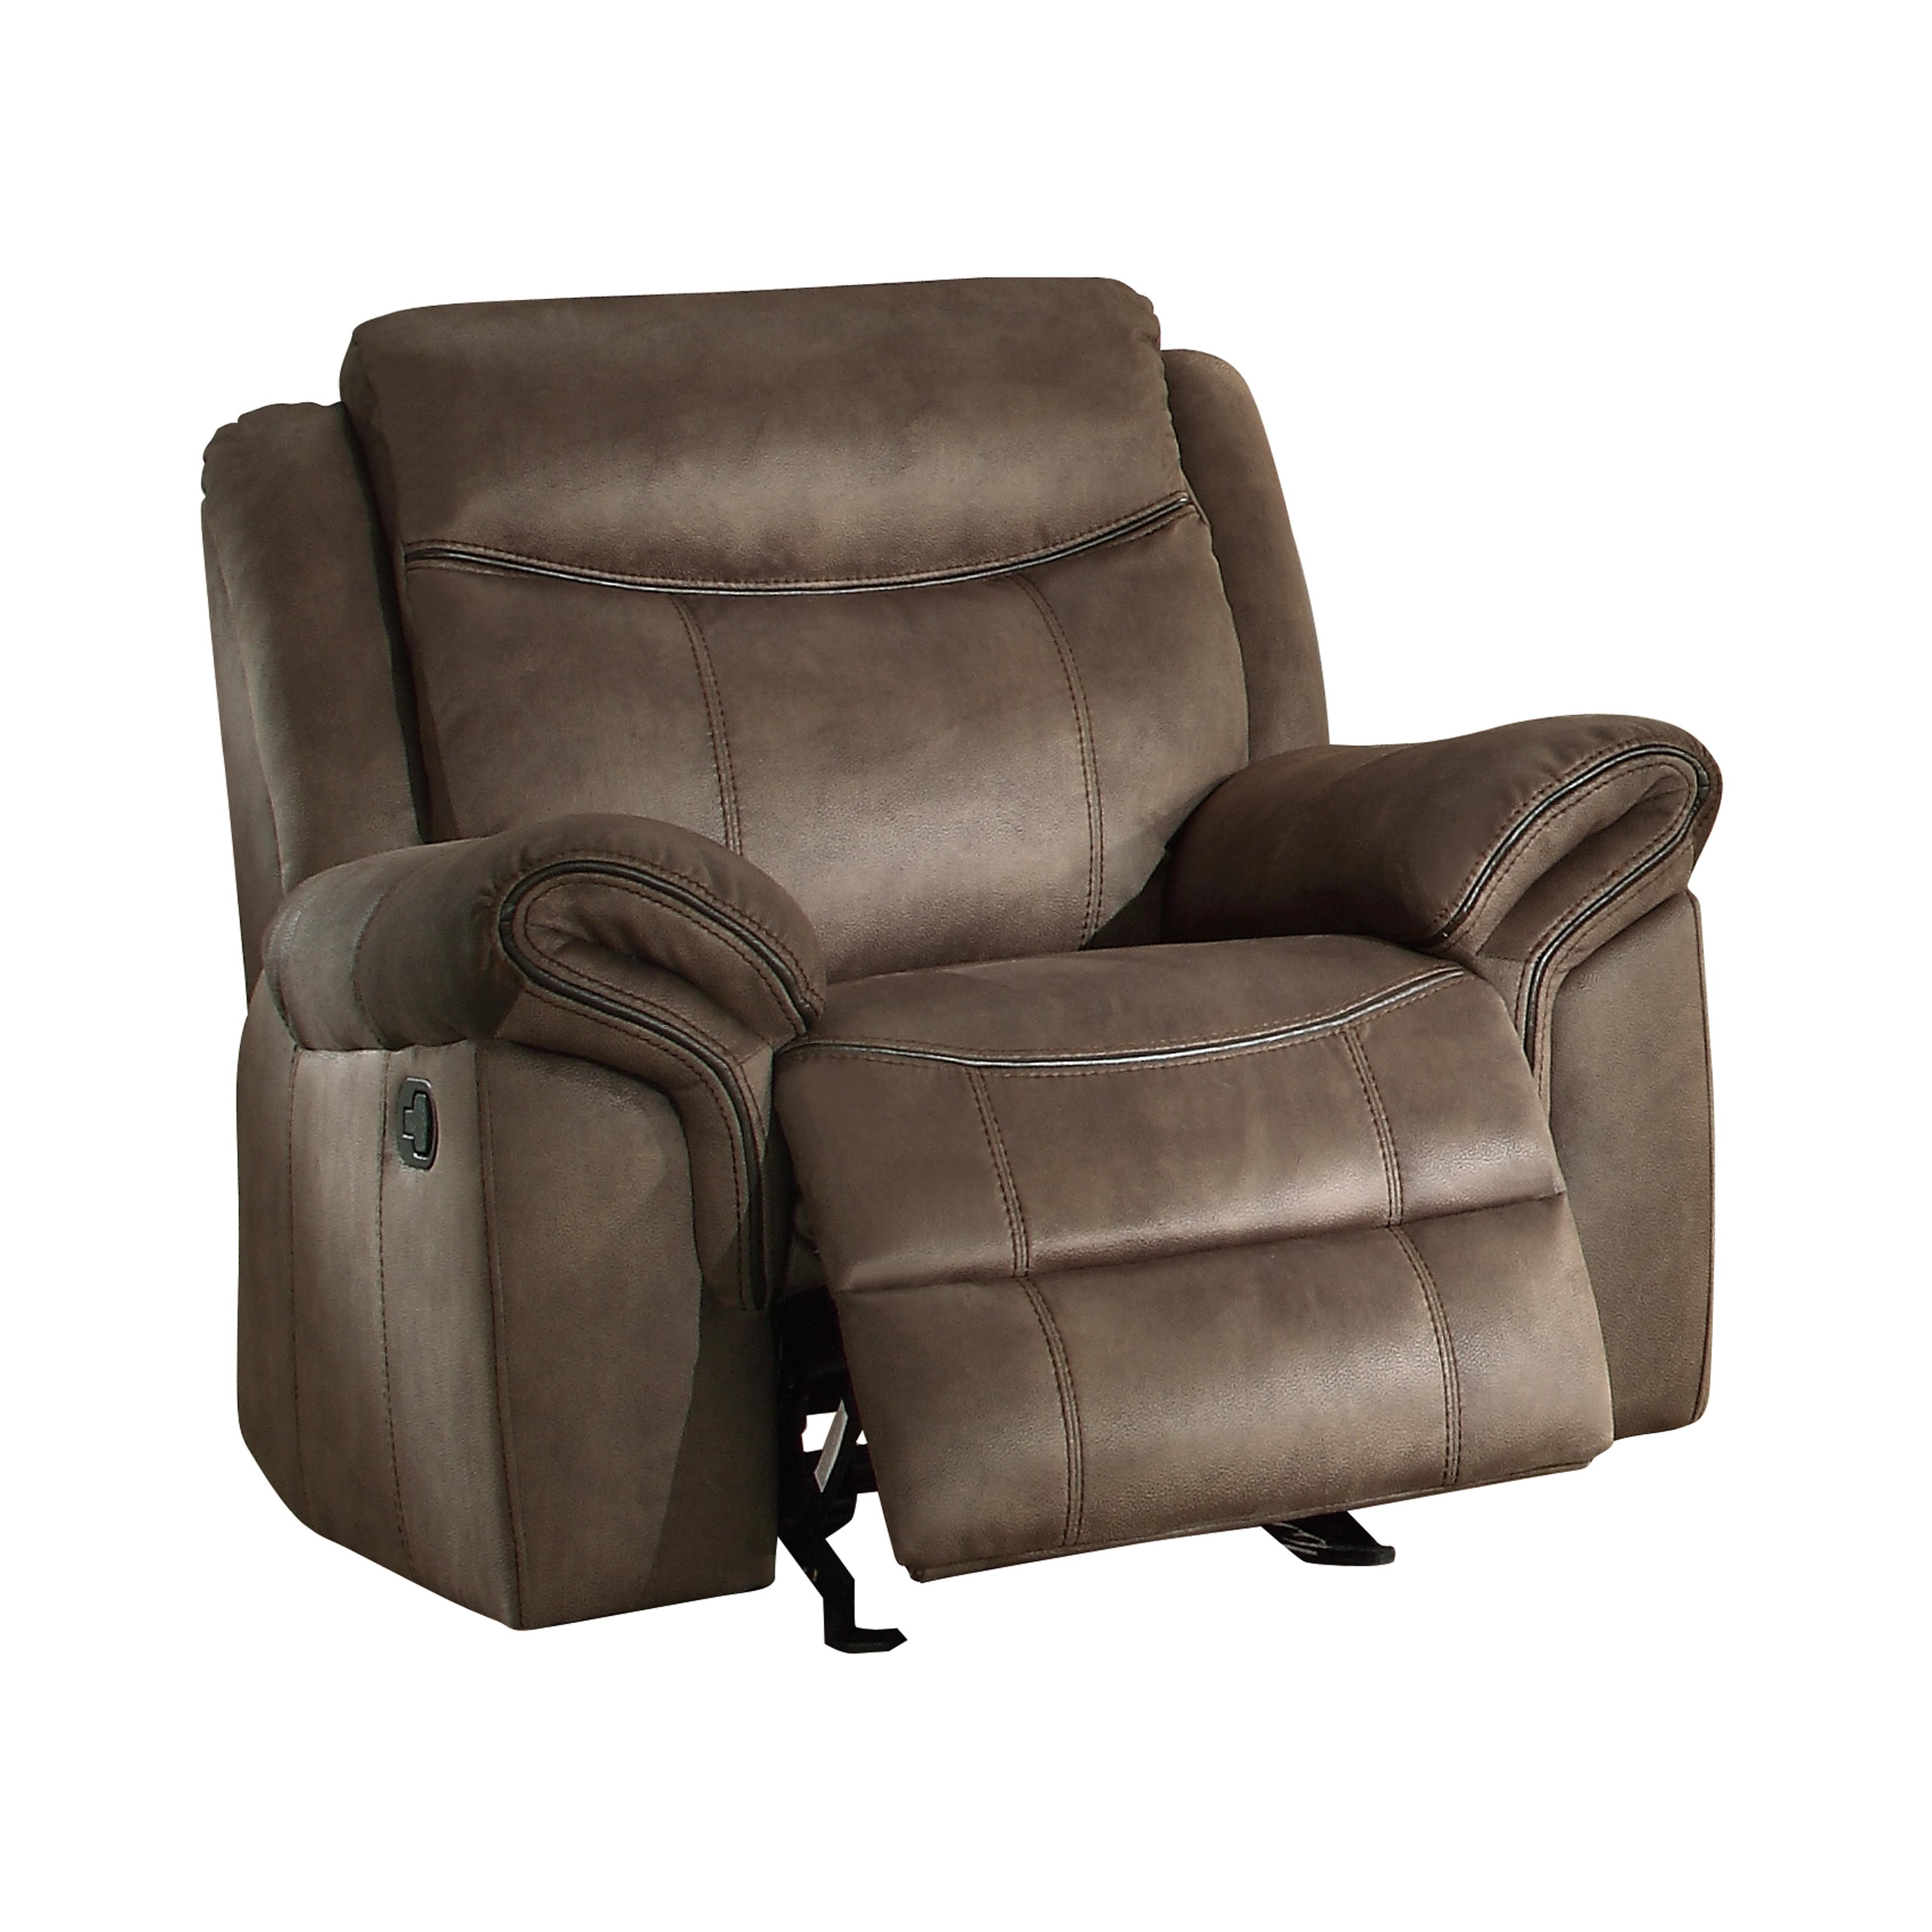 

    
Transitional Brown Faux Leather Reclining Chair Homelegance 8206NF-1 Aram
